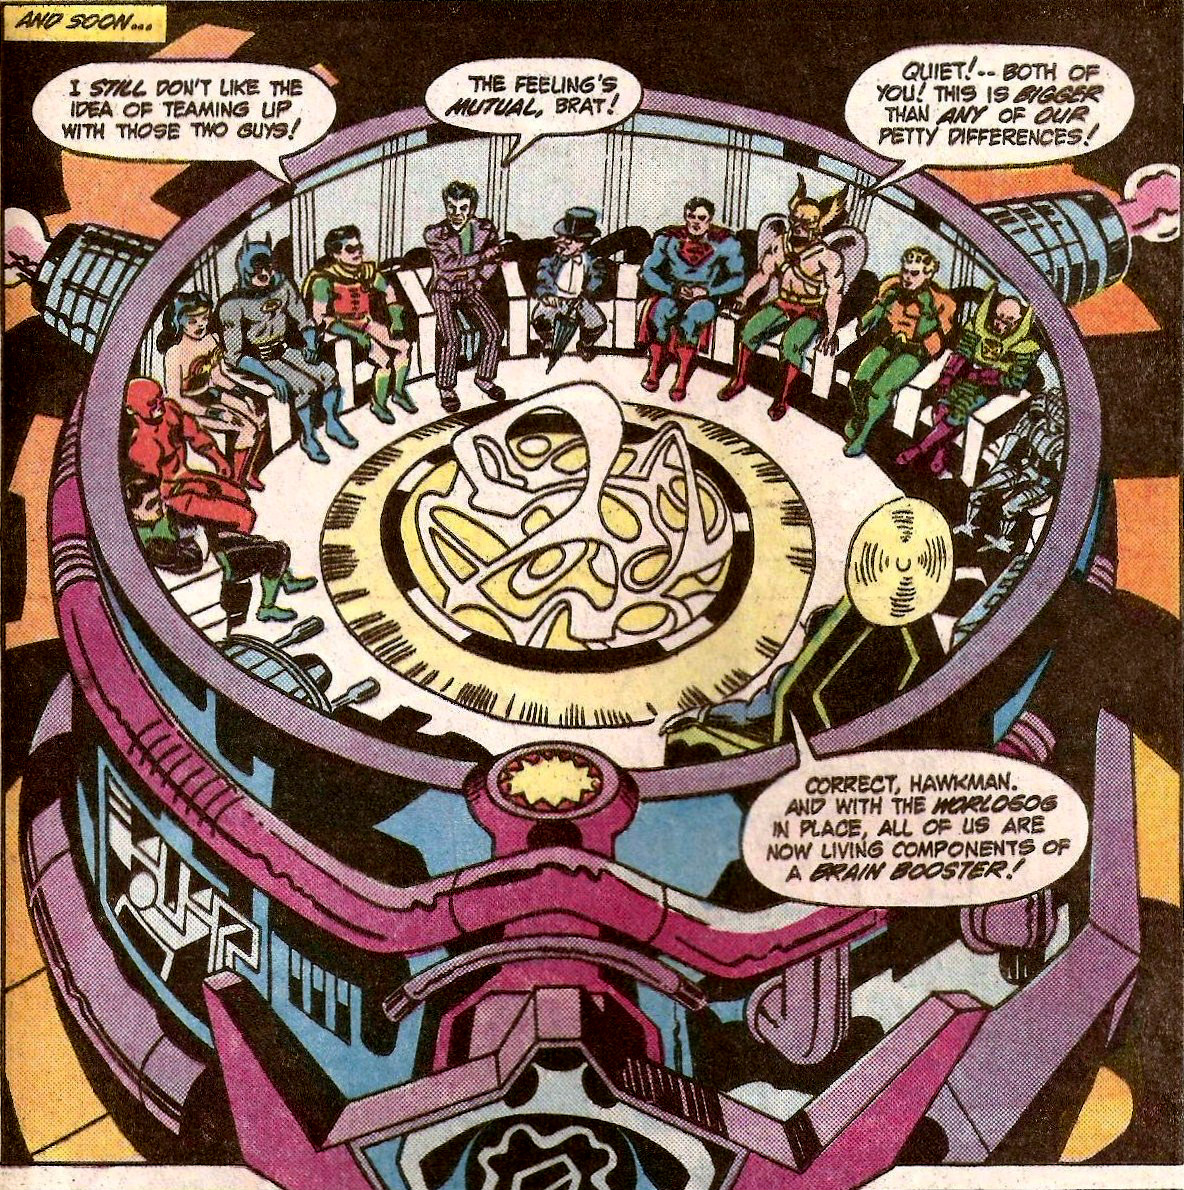 From Super Powers (Vol. 1) #5 (1984)